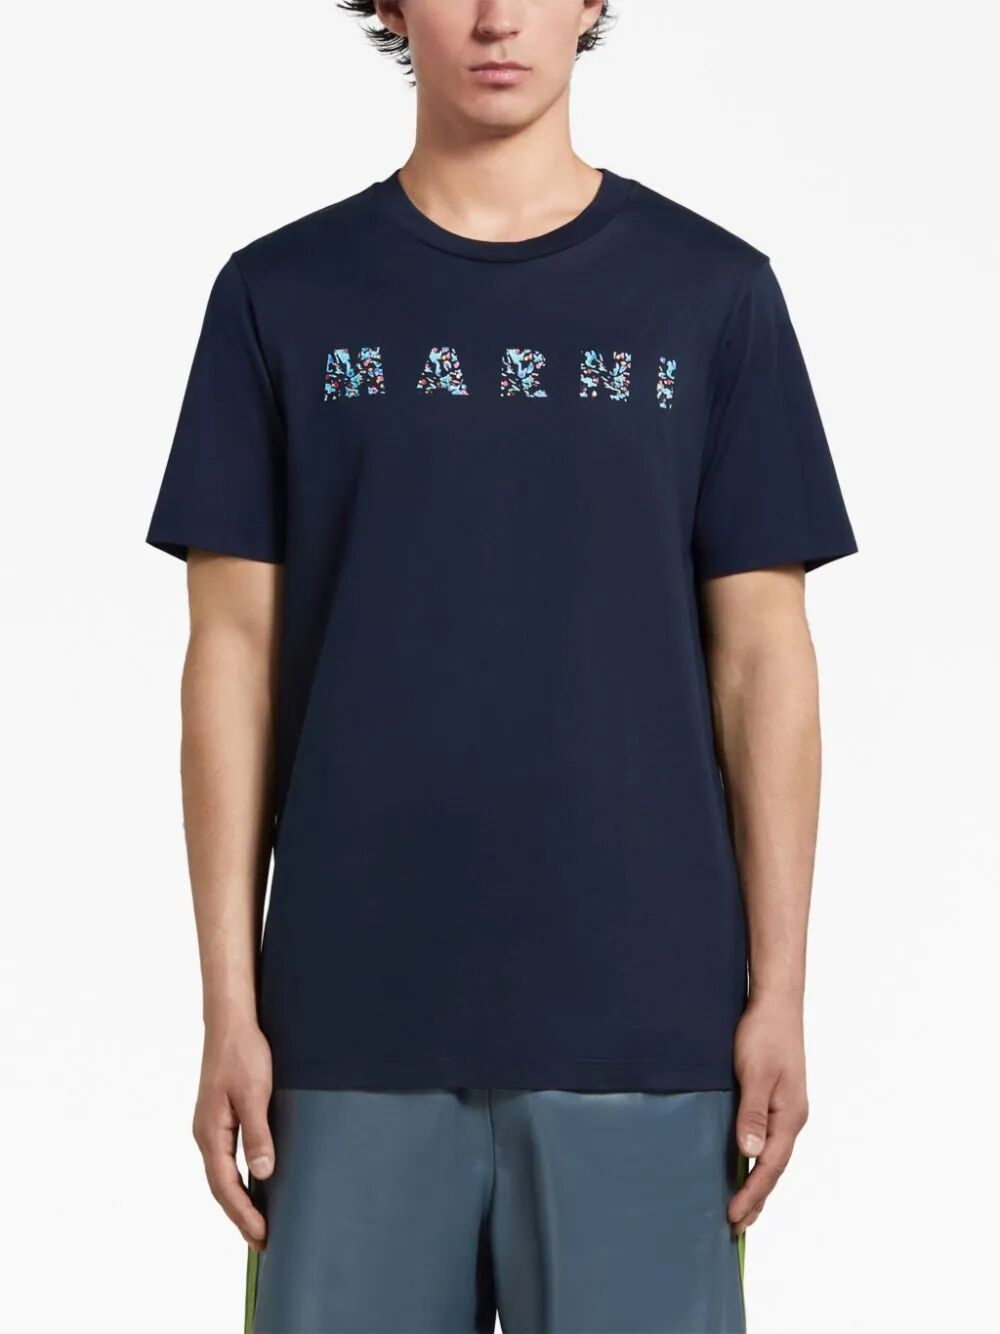 T-shirt with patterned marni print - 3